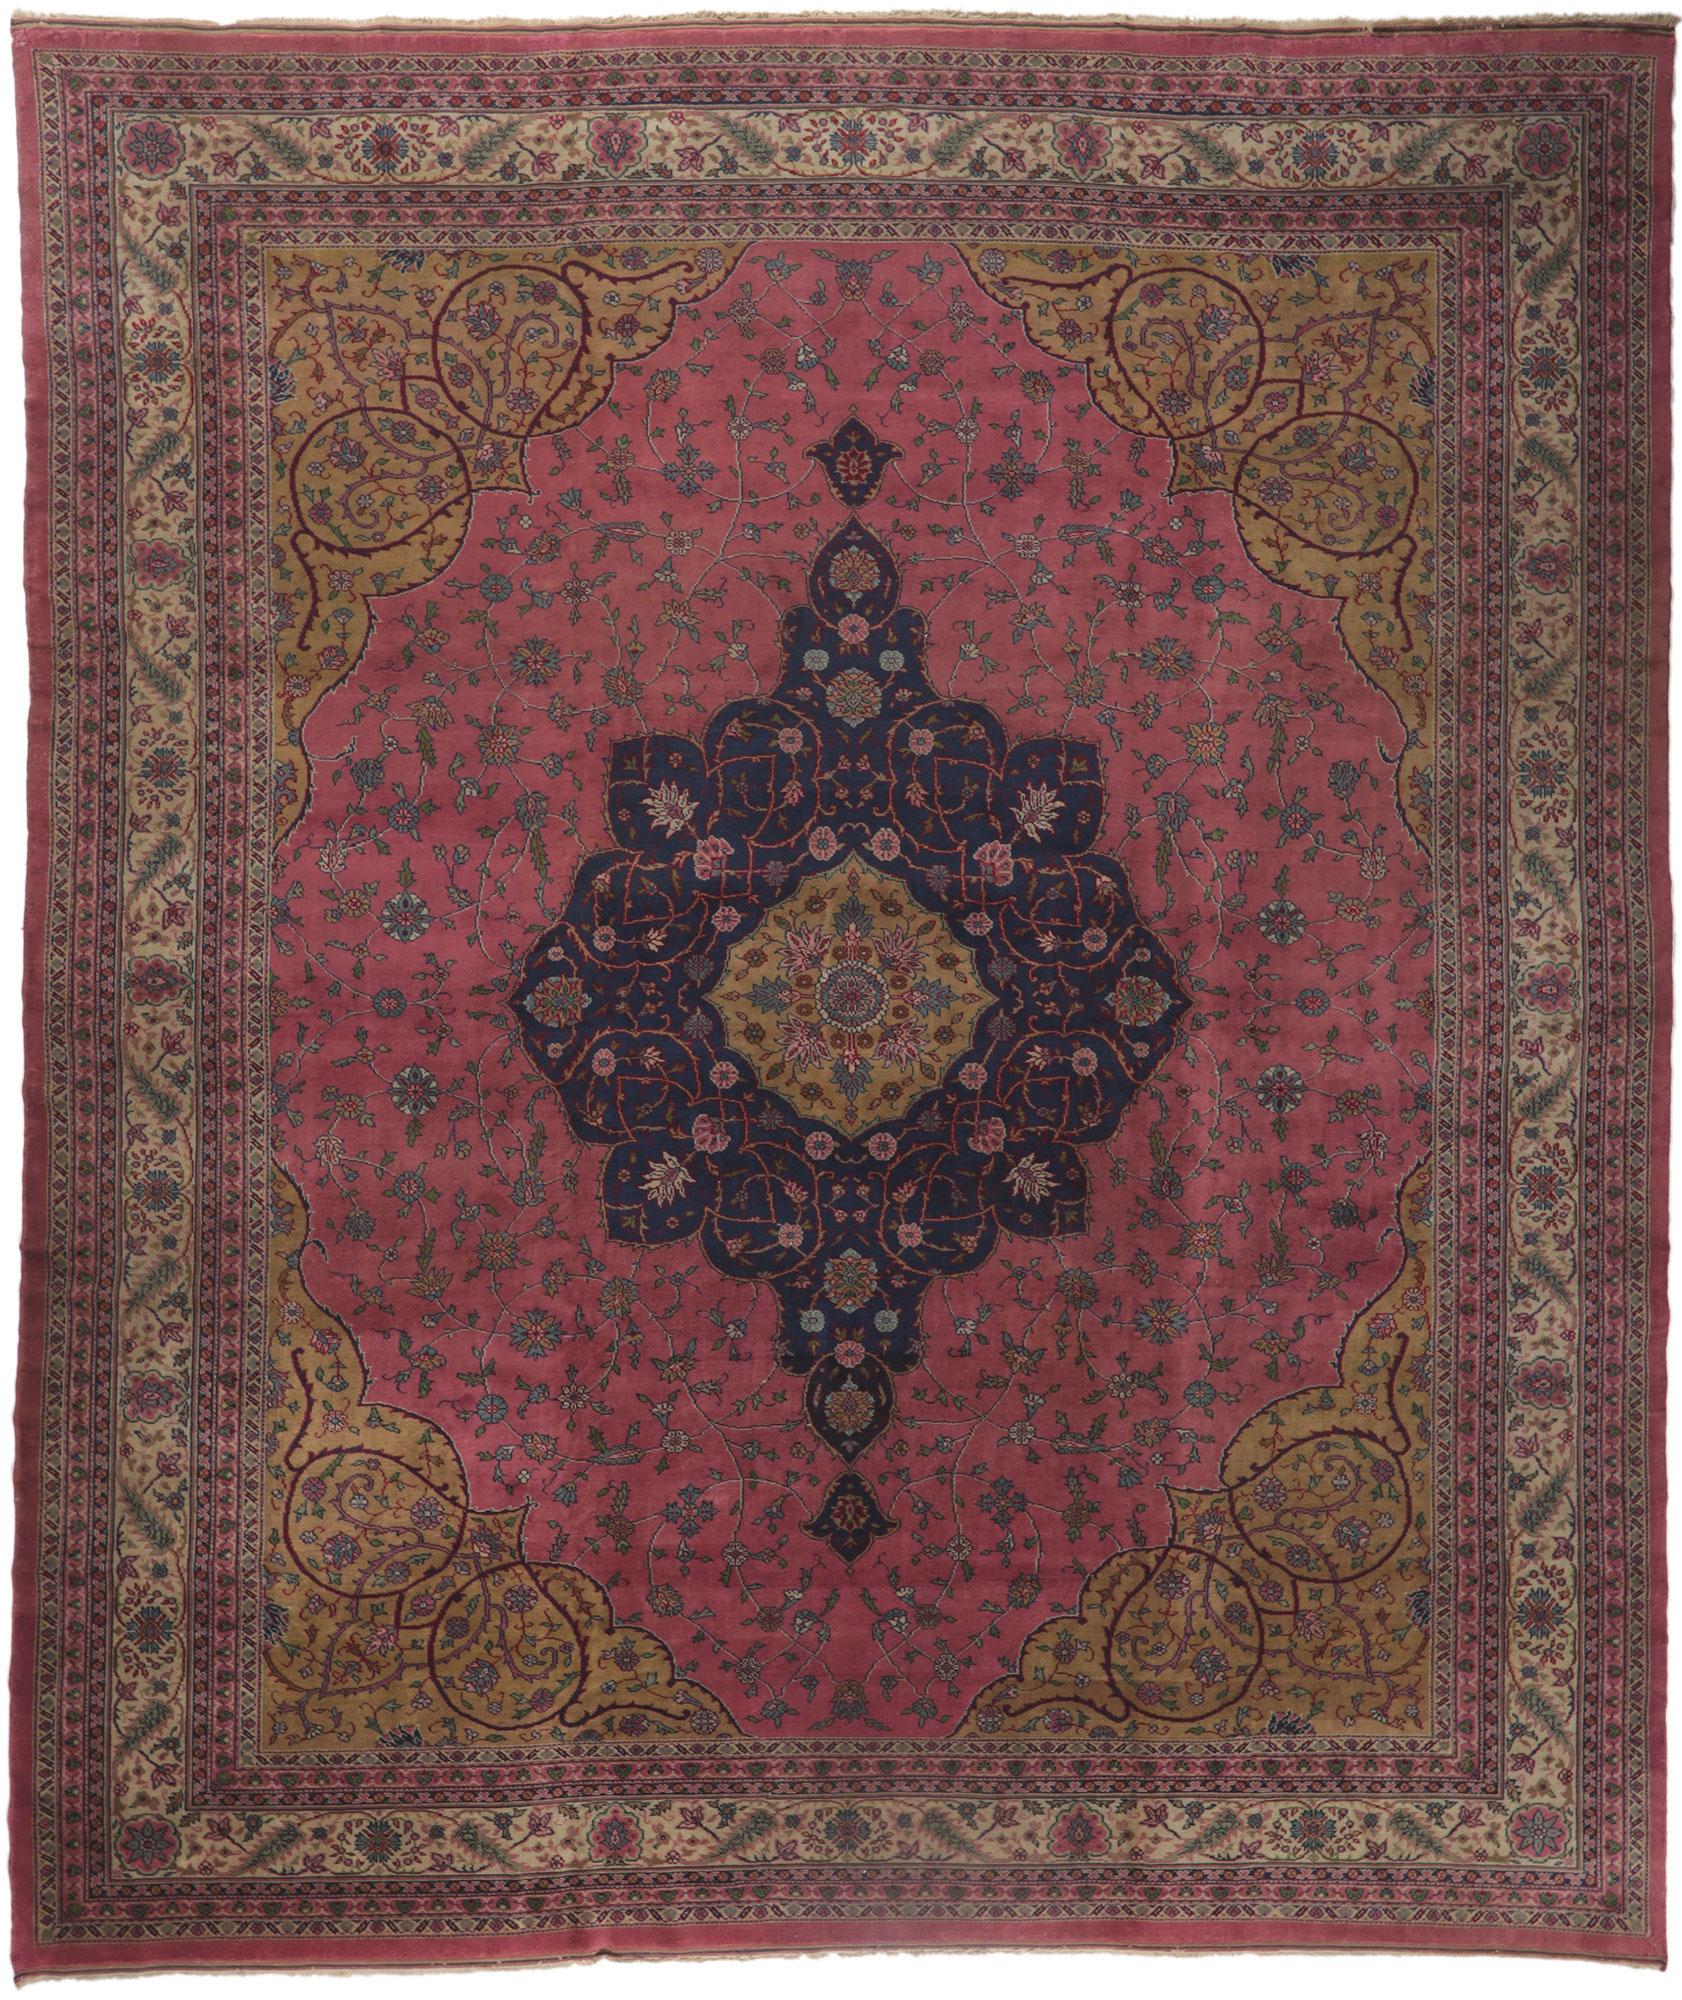 Antique Pink Turkish Sparta Rug, Art Nouveau Elegance Meets Baroque Opulence In Good Condition For Sale In Dallas, TX